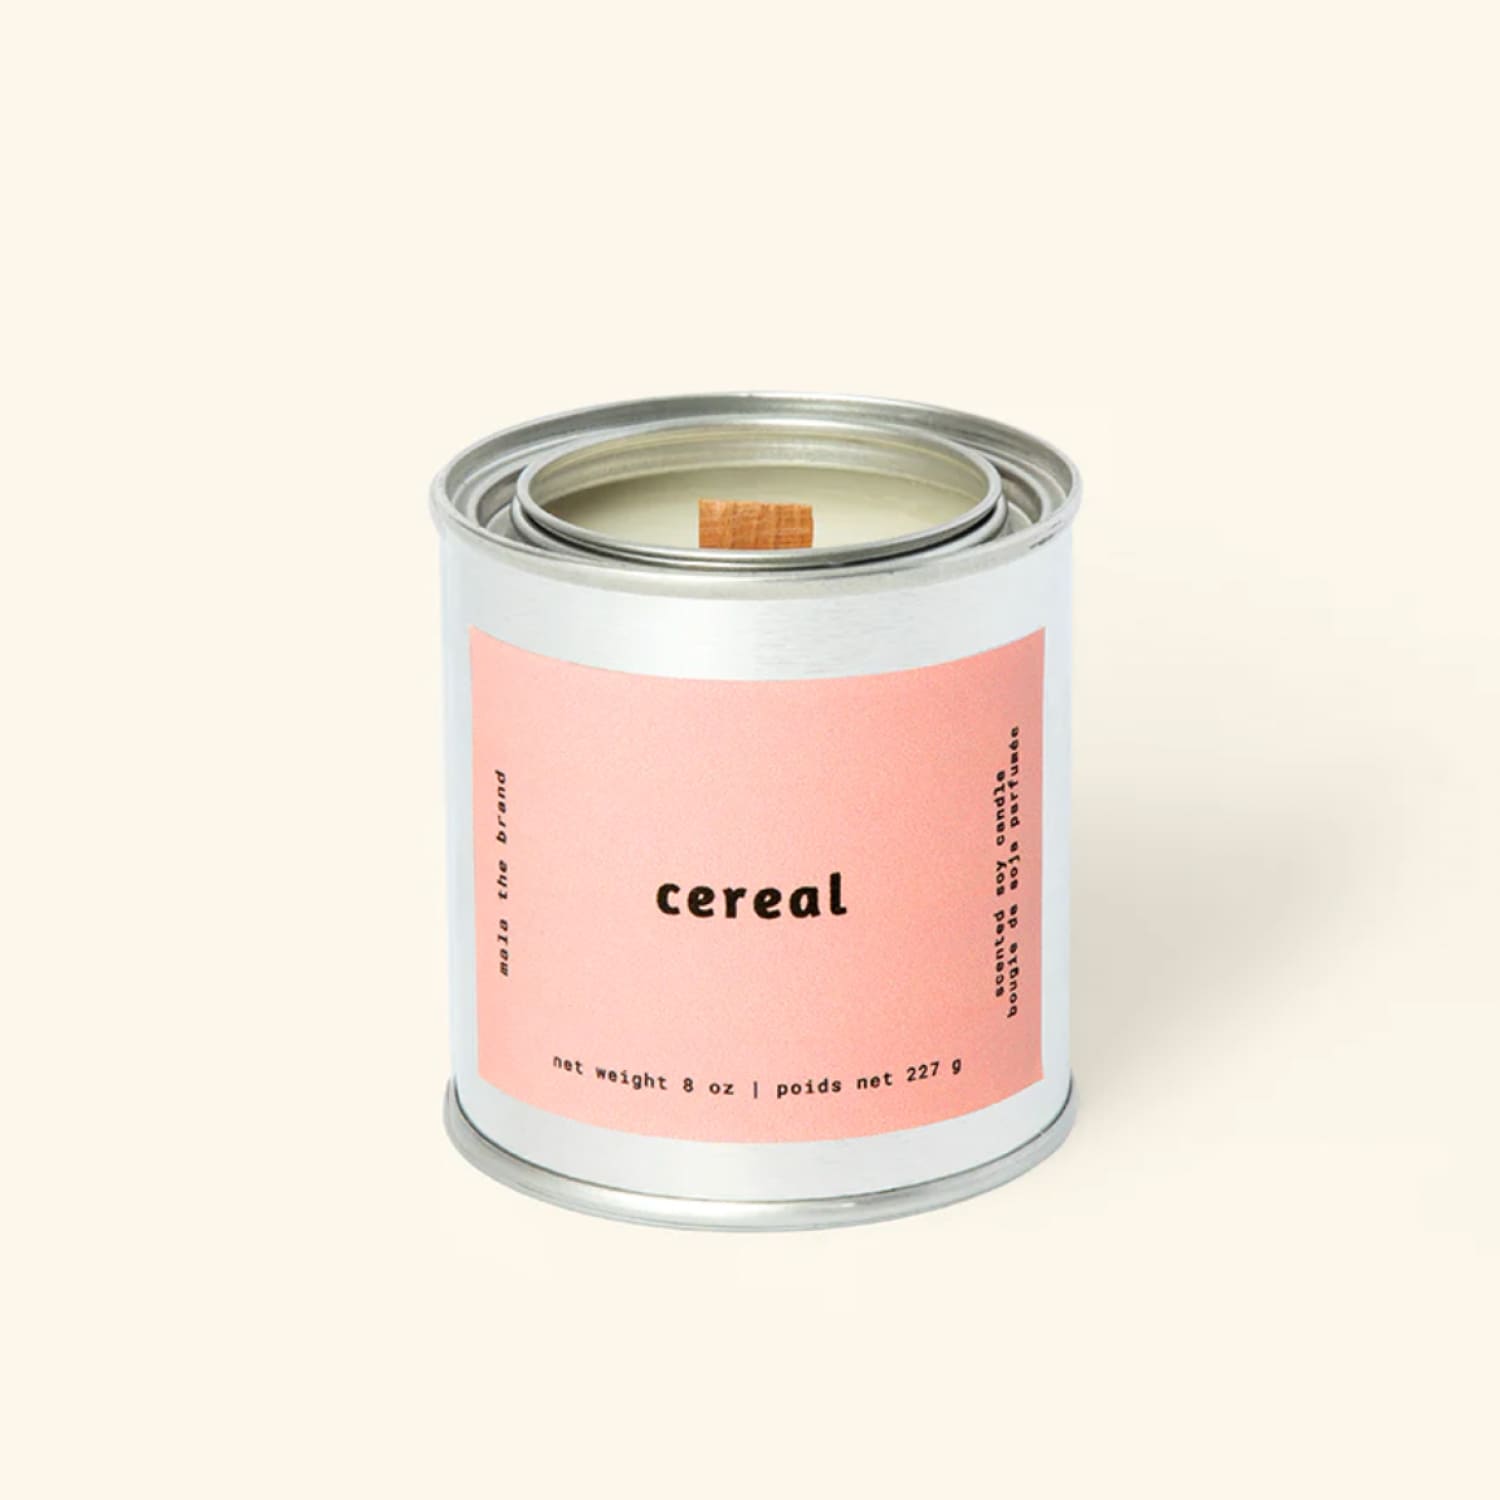 Mala Candle - Cereal Candle - Cereal - Food Novelty - Hand